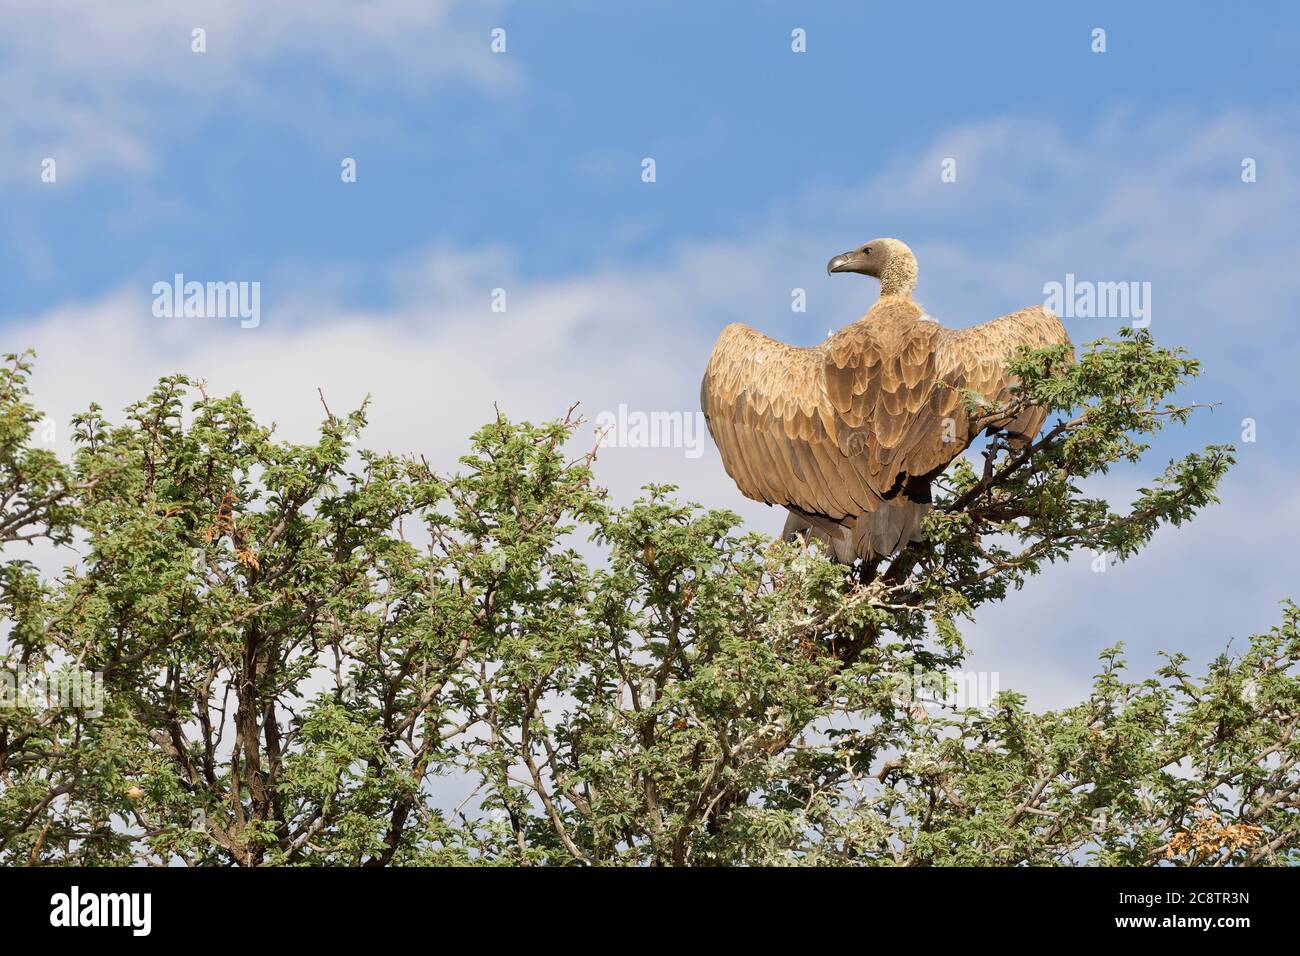 White-backed vulture (Gyps africanus), adult, perched on a tree top, outspread wings, Kgalagadi Transfrontier Park, Northern Cape, South Africa,Africa Stock Photo